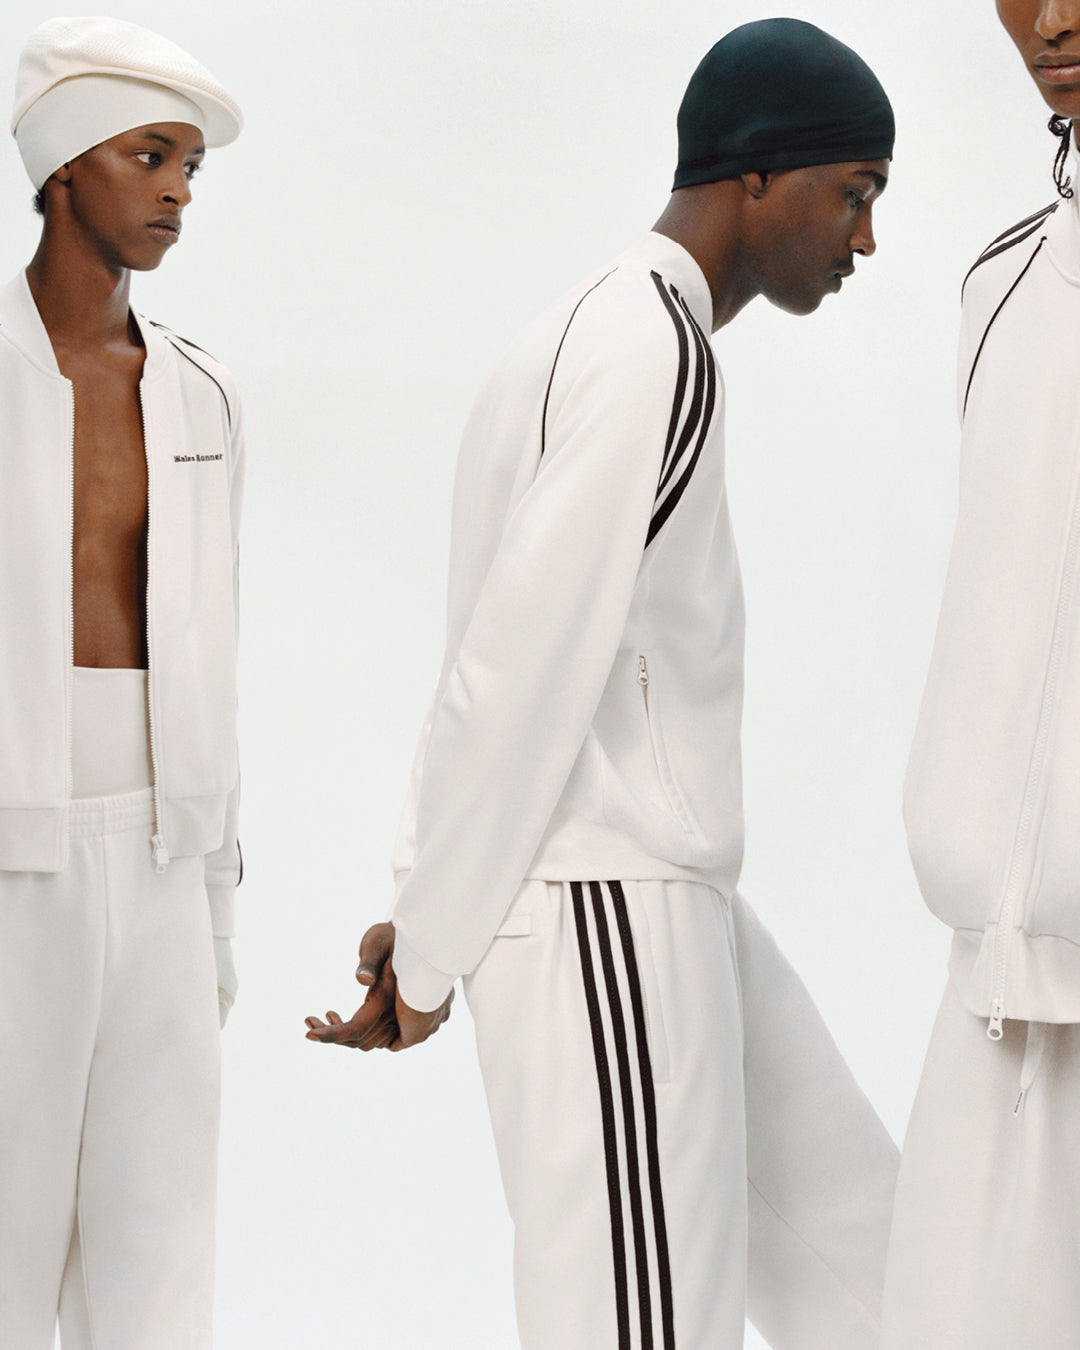 ADIDAS ORIGINALS BY WALES BONNERFW23 COLLECTION